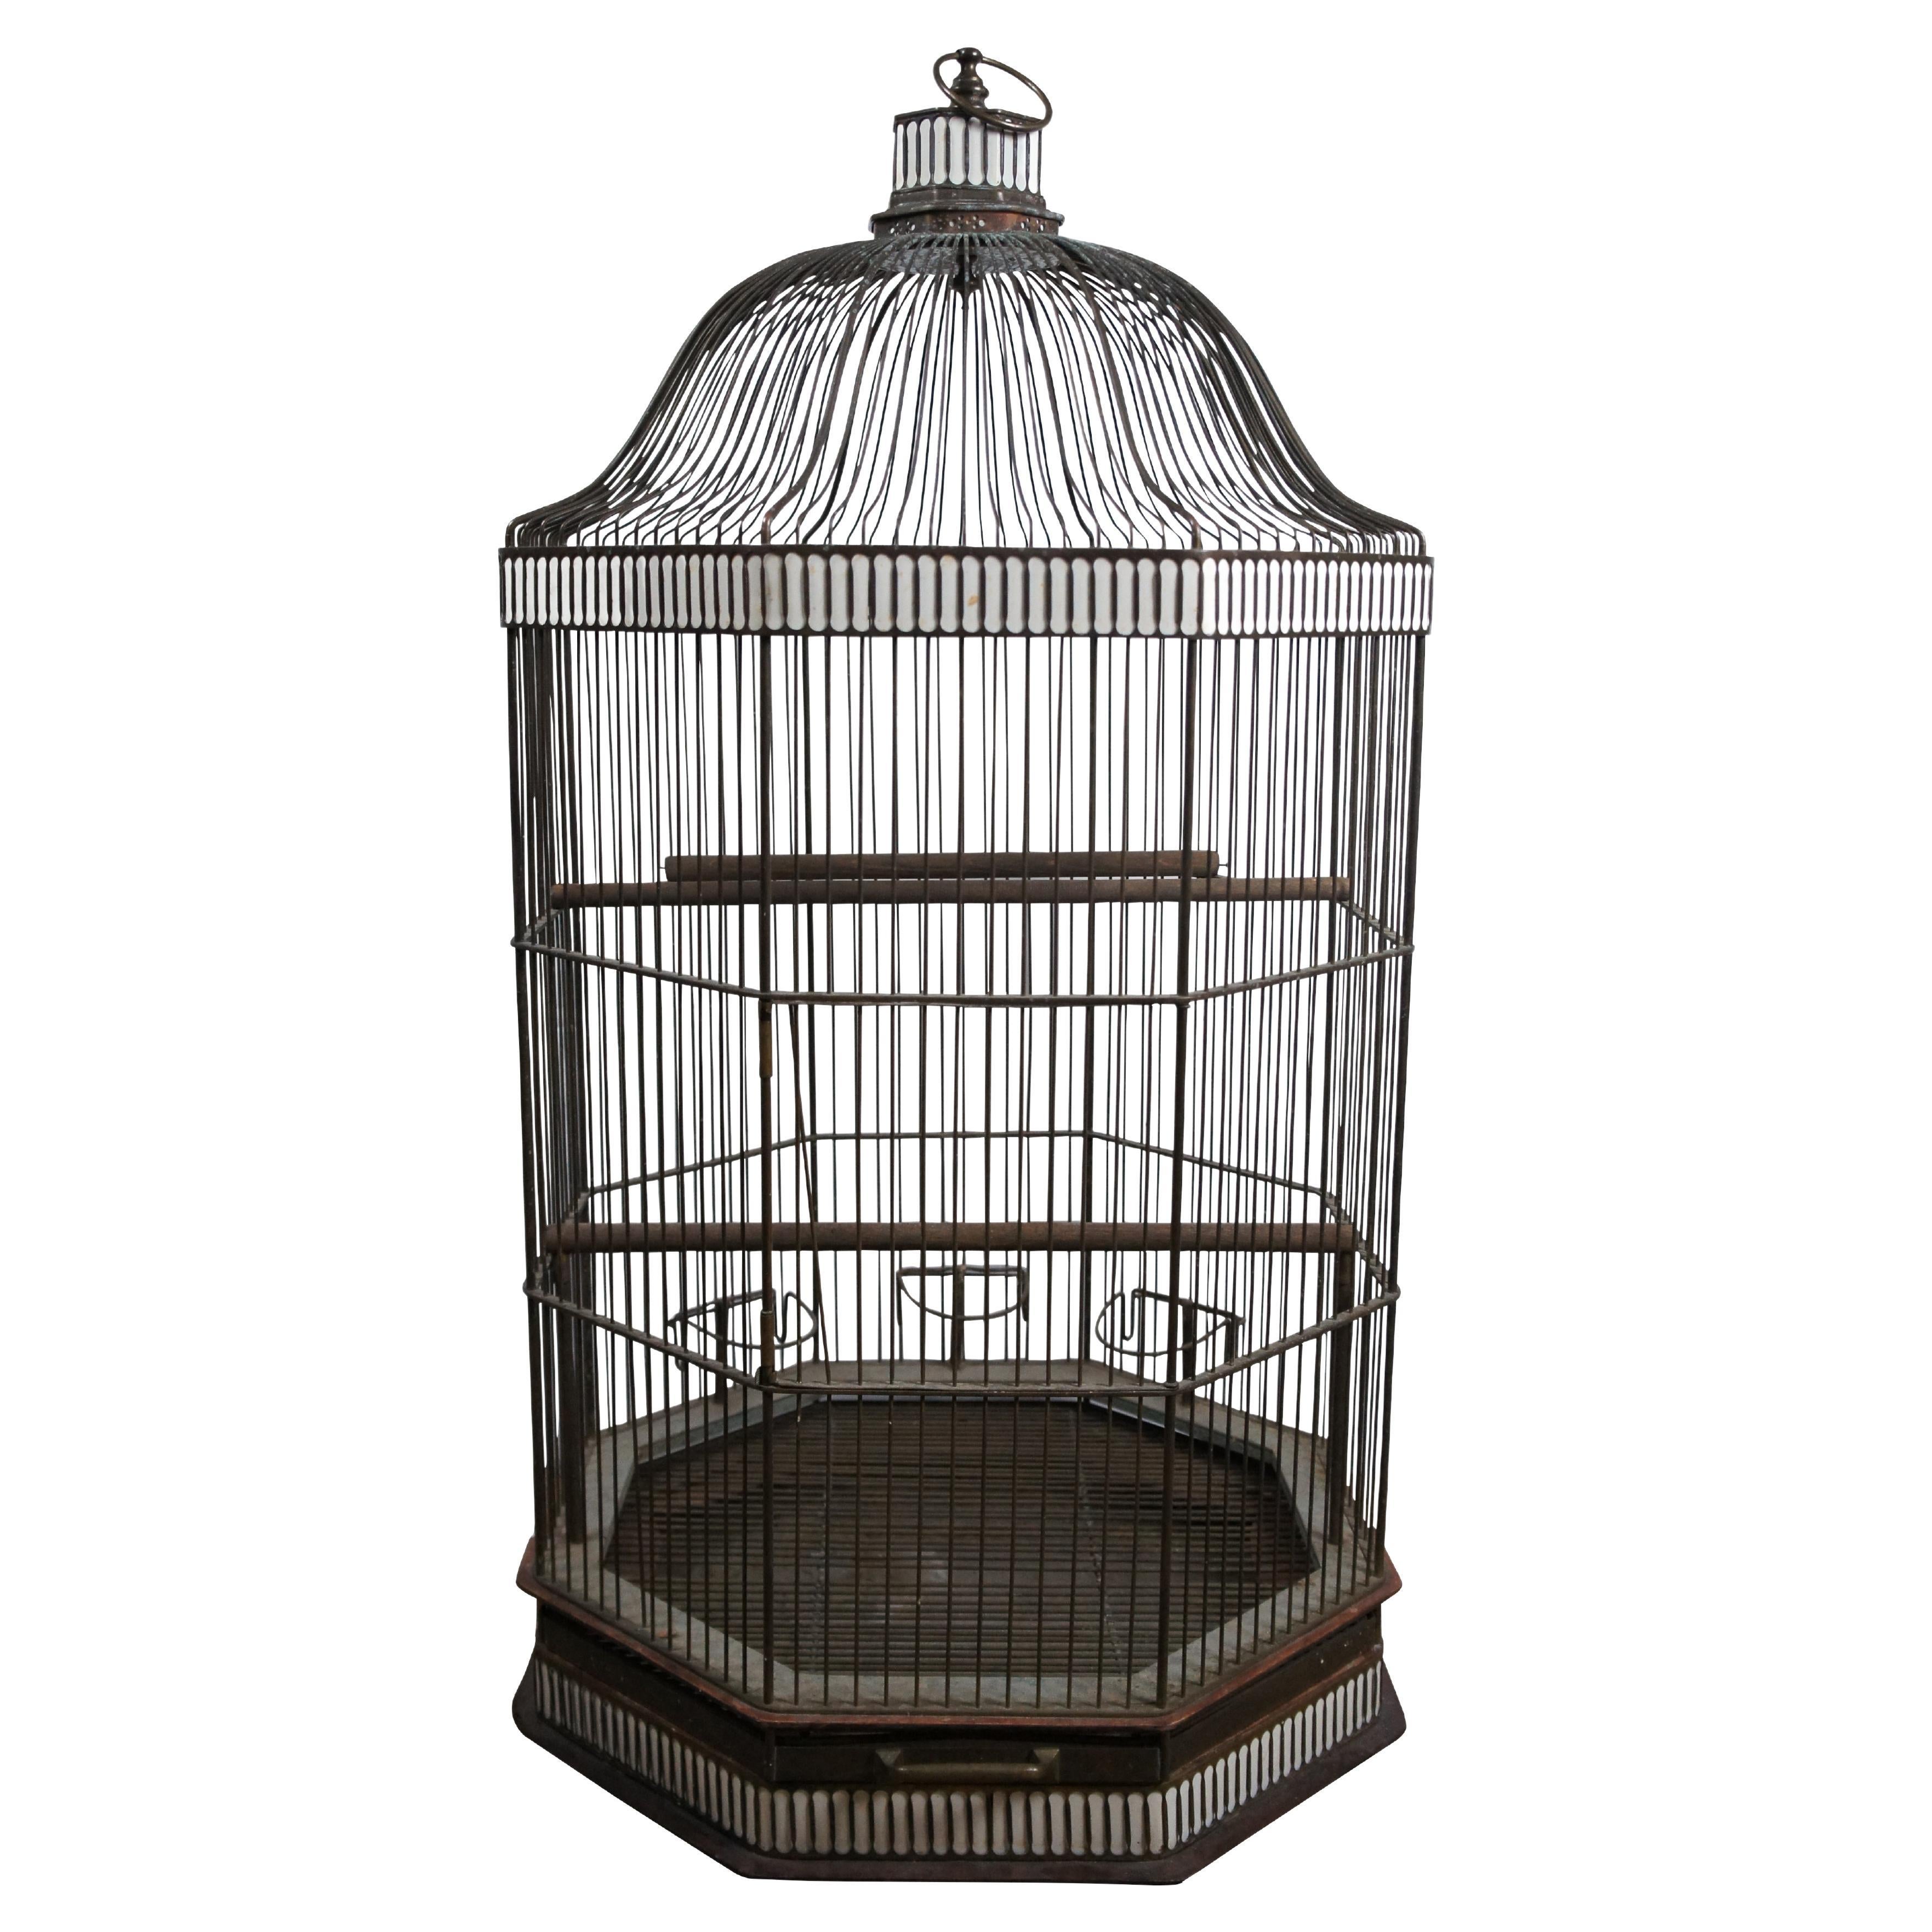 Victorian Bird Cages - 11 For Sale at 1stDibs